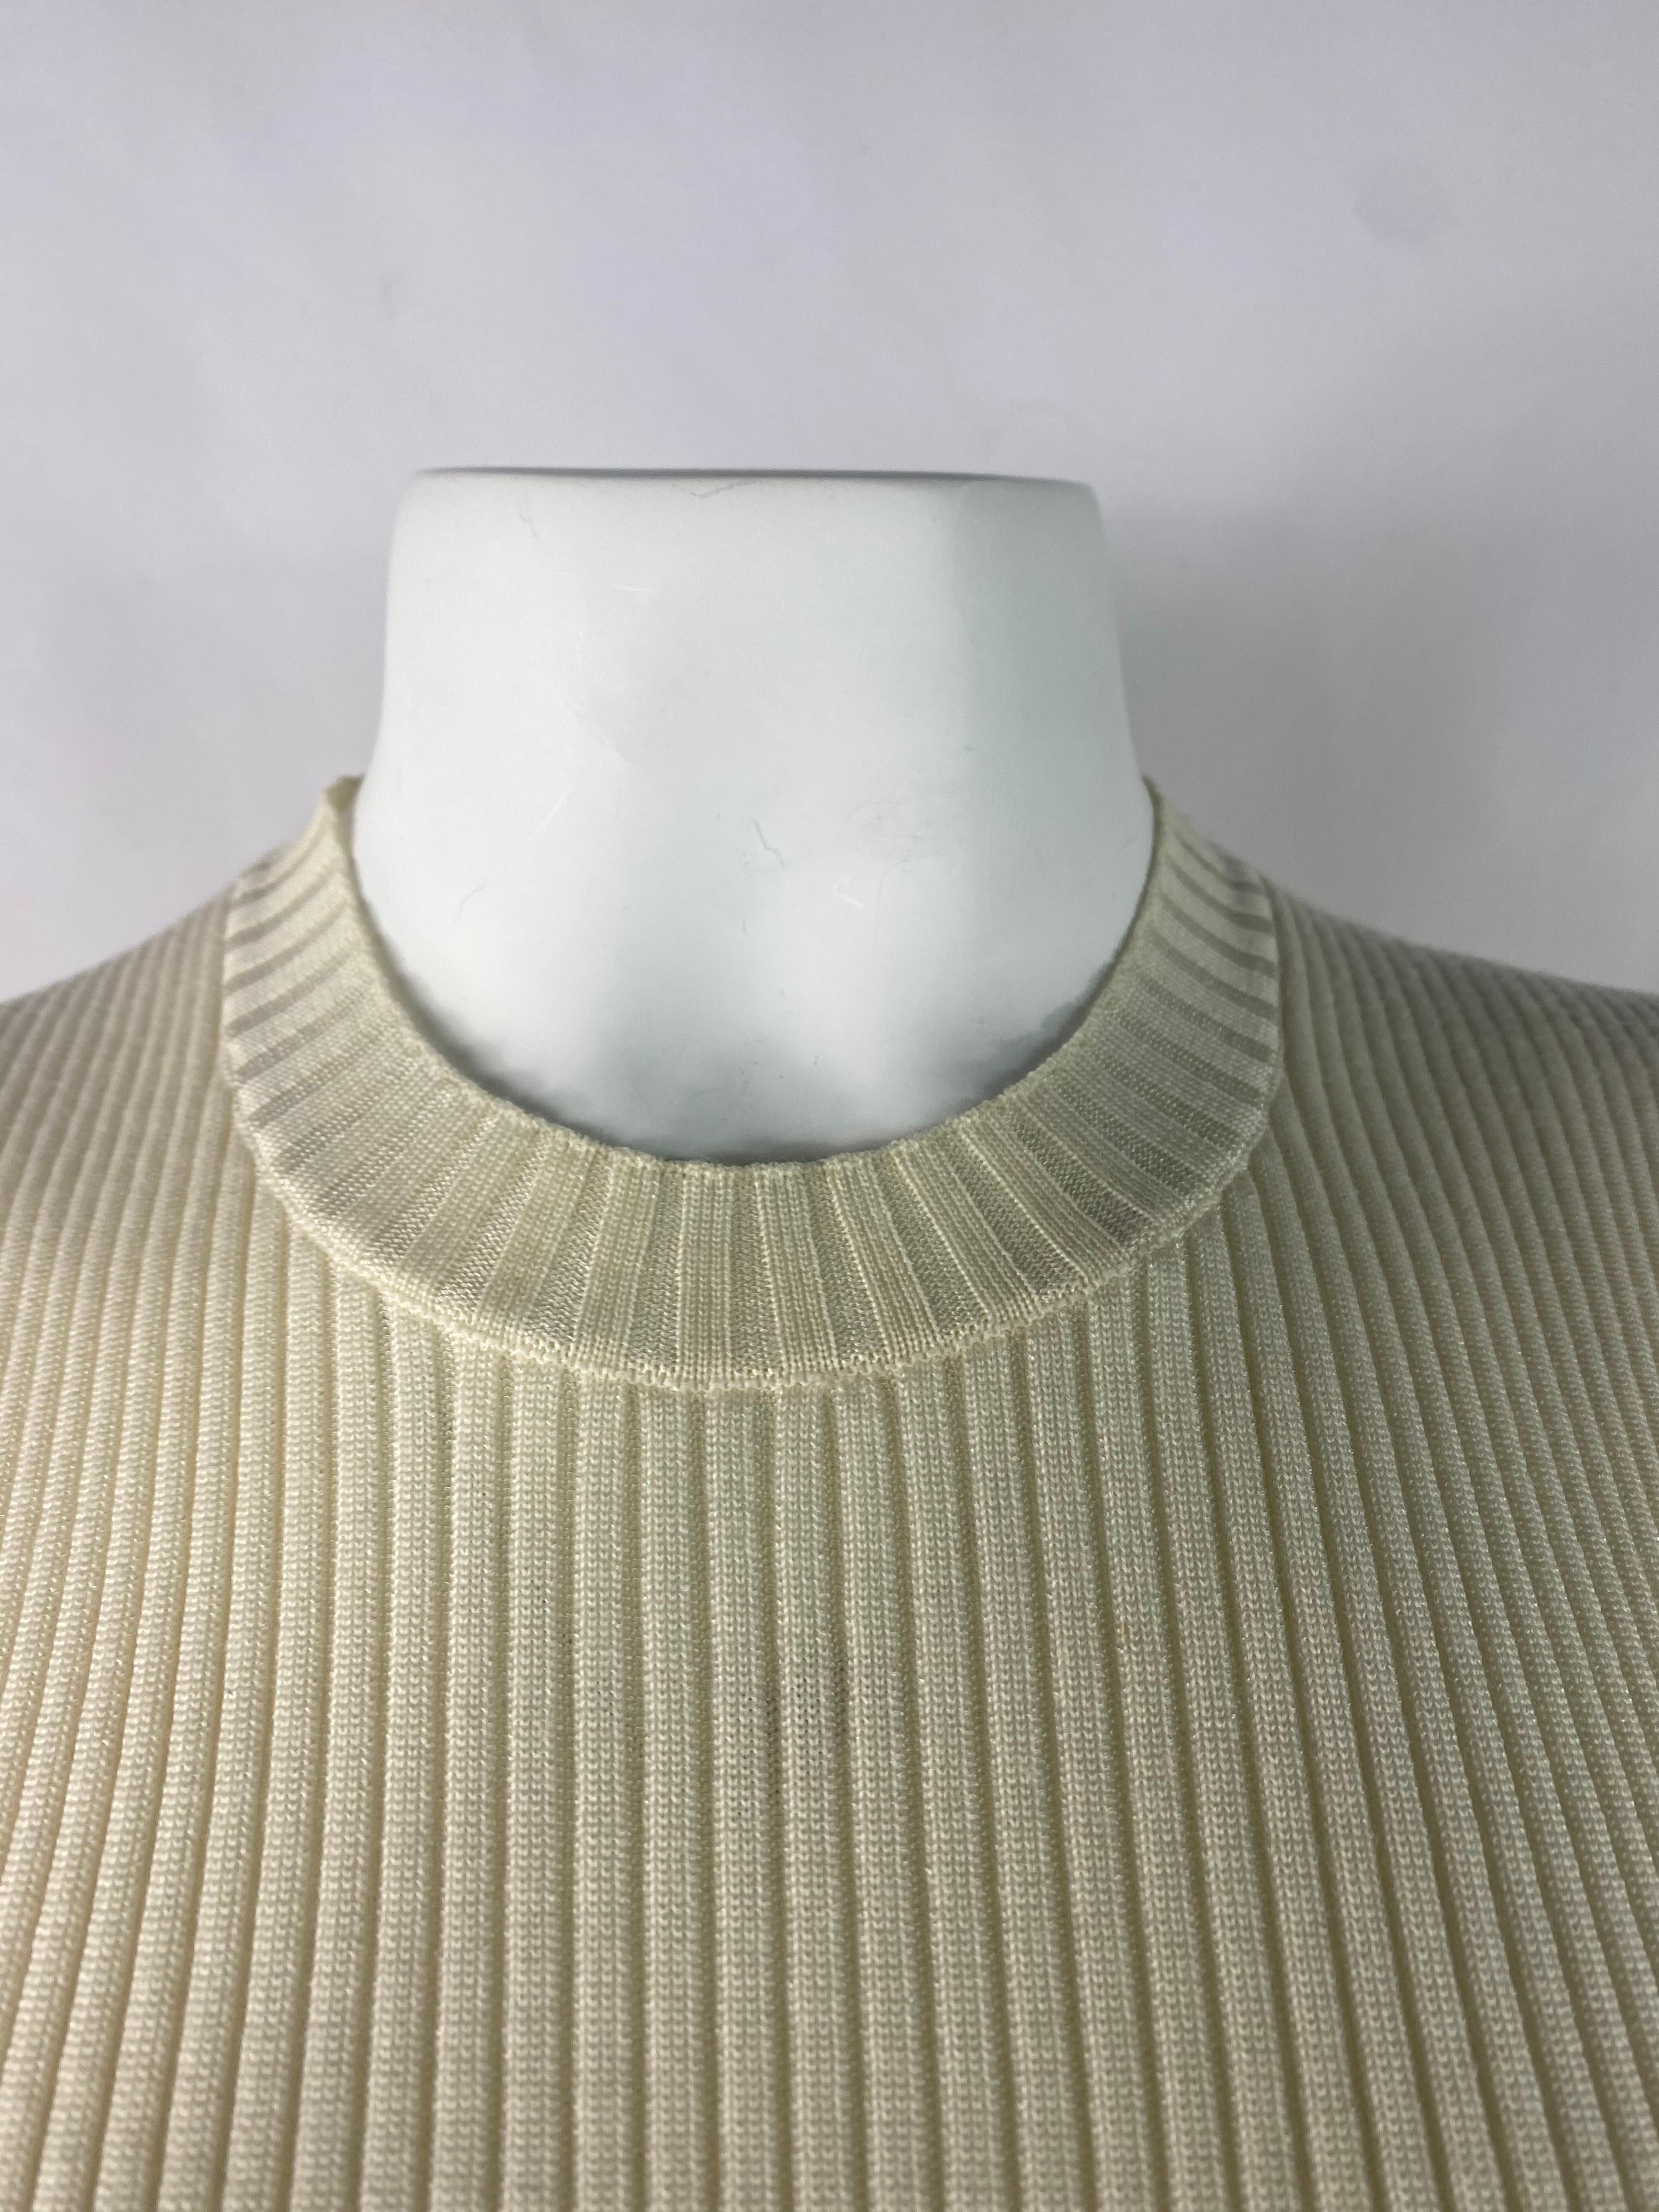 CELINE Cream/ Ivory Knit Top, Size Large In Excellent Condition For Sale In Beverly Hills, CA